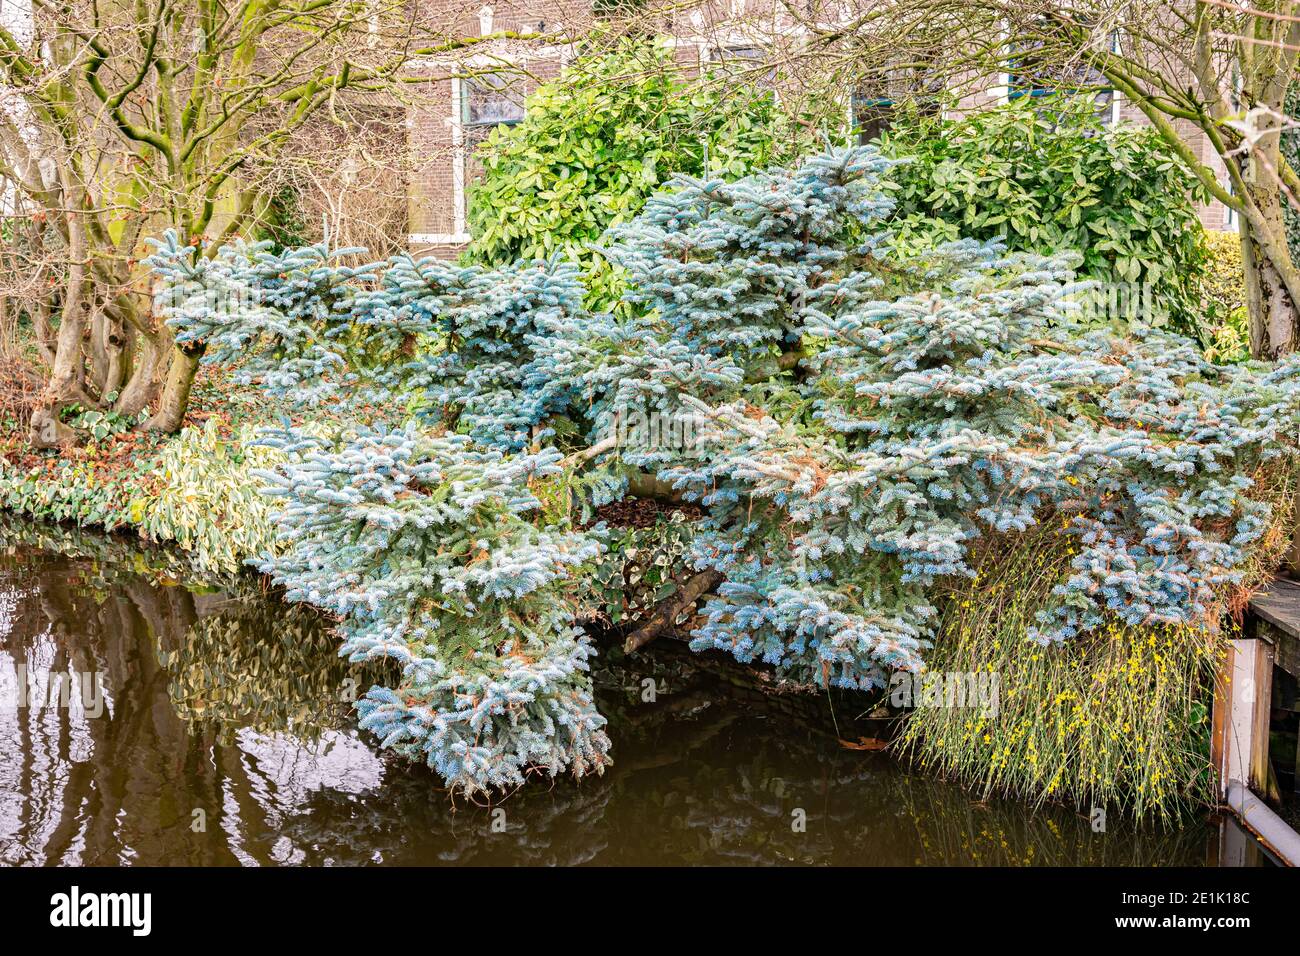 Spreading dwarf blue noble fir (Abies procera 'Glauca Prostrata') hangs over the water of a pond. Stock Photo